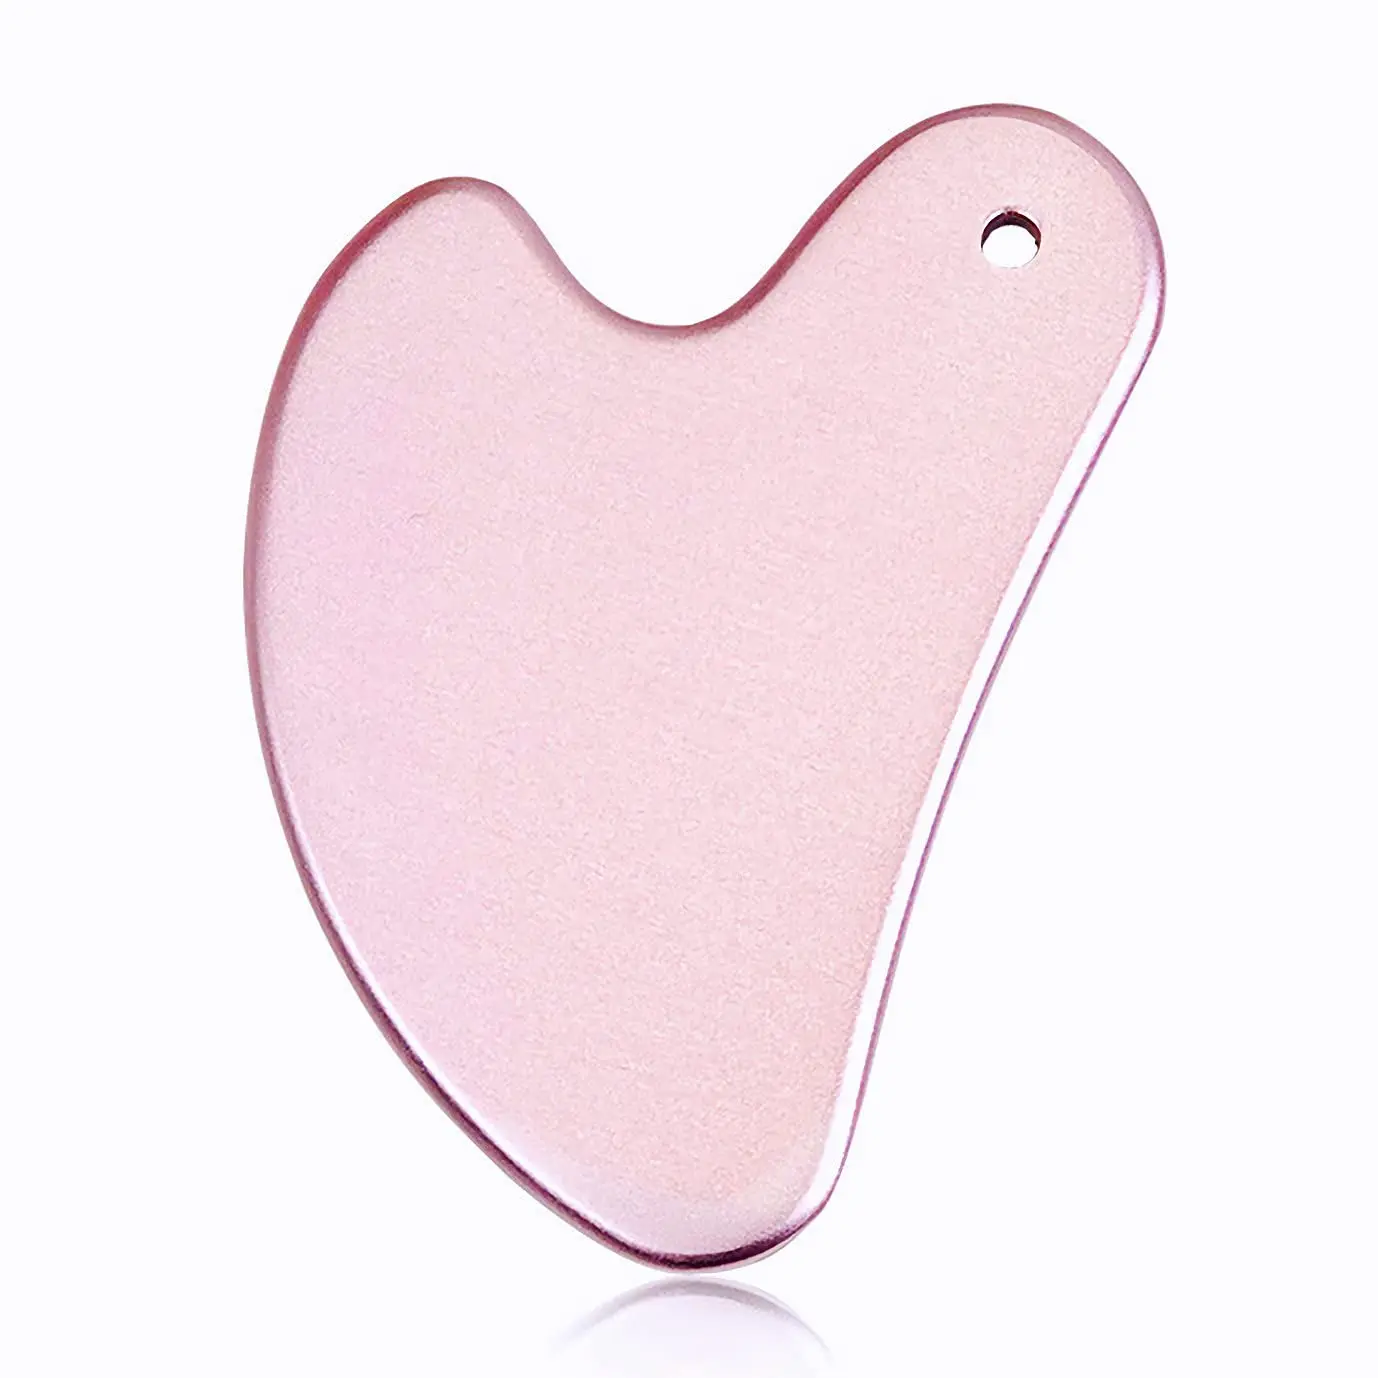 

Stainless Steel Gua Sha Board Muscle Massage Tool Tissue Therapy Scraping Plate Promote Blood Circulation Body Relax Slimming